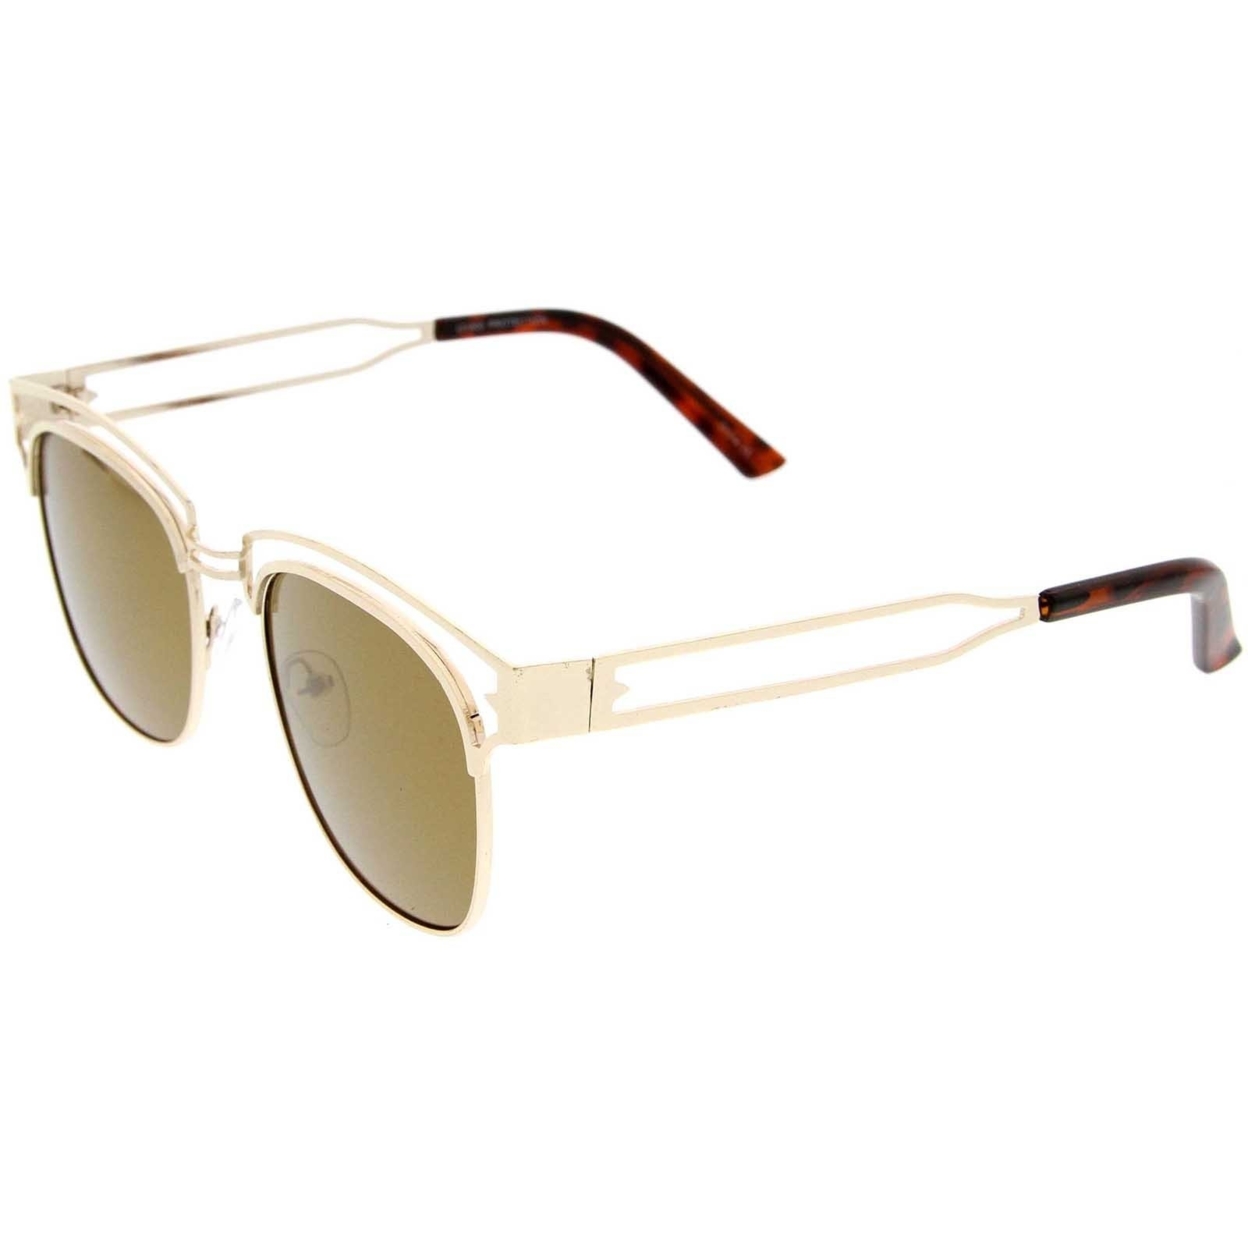 Modern Open Metal Colored Mirror Square Flat Lens Horn Rimmed Sunglasses 53mm - Gold / Pink Mirror